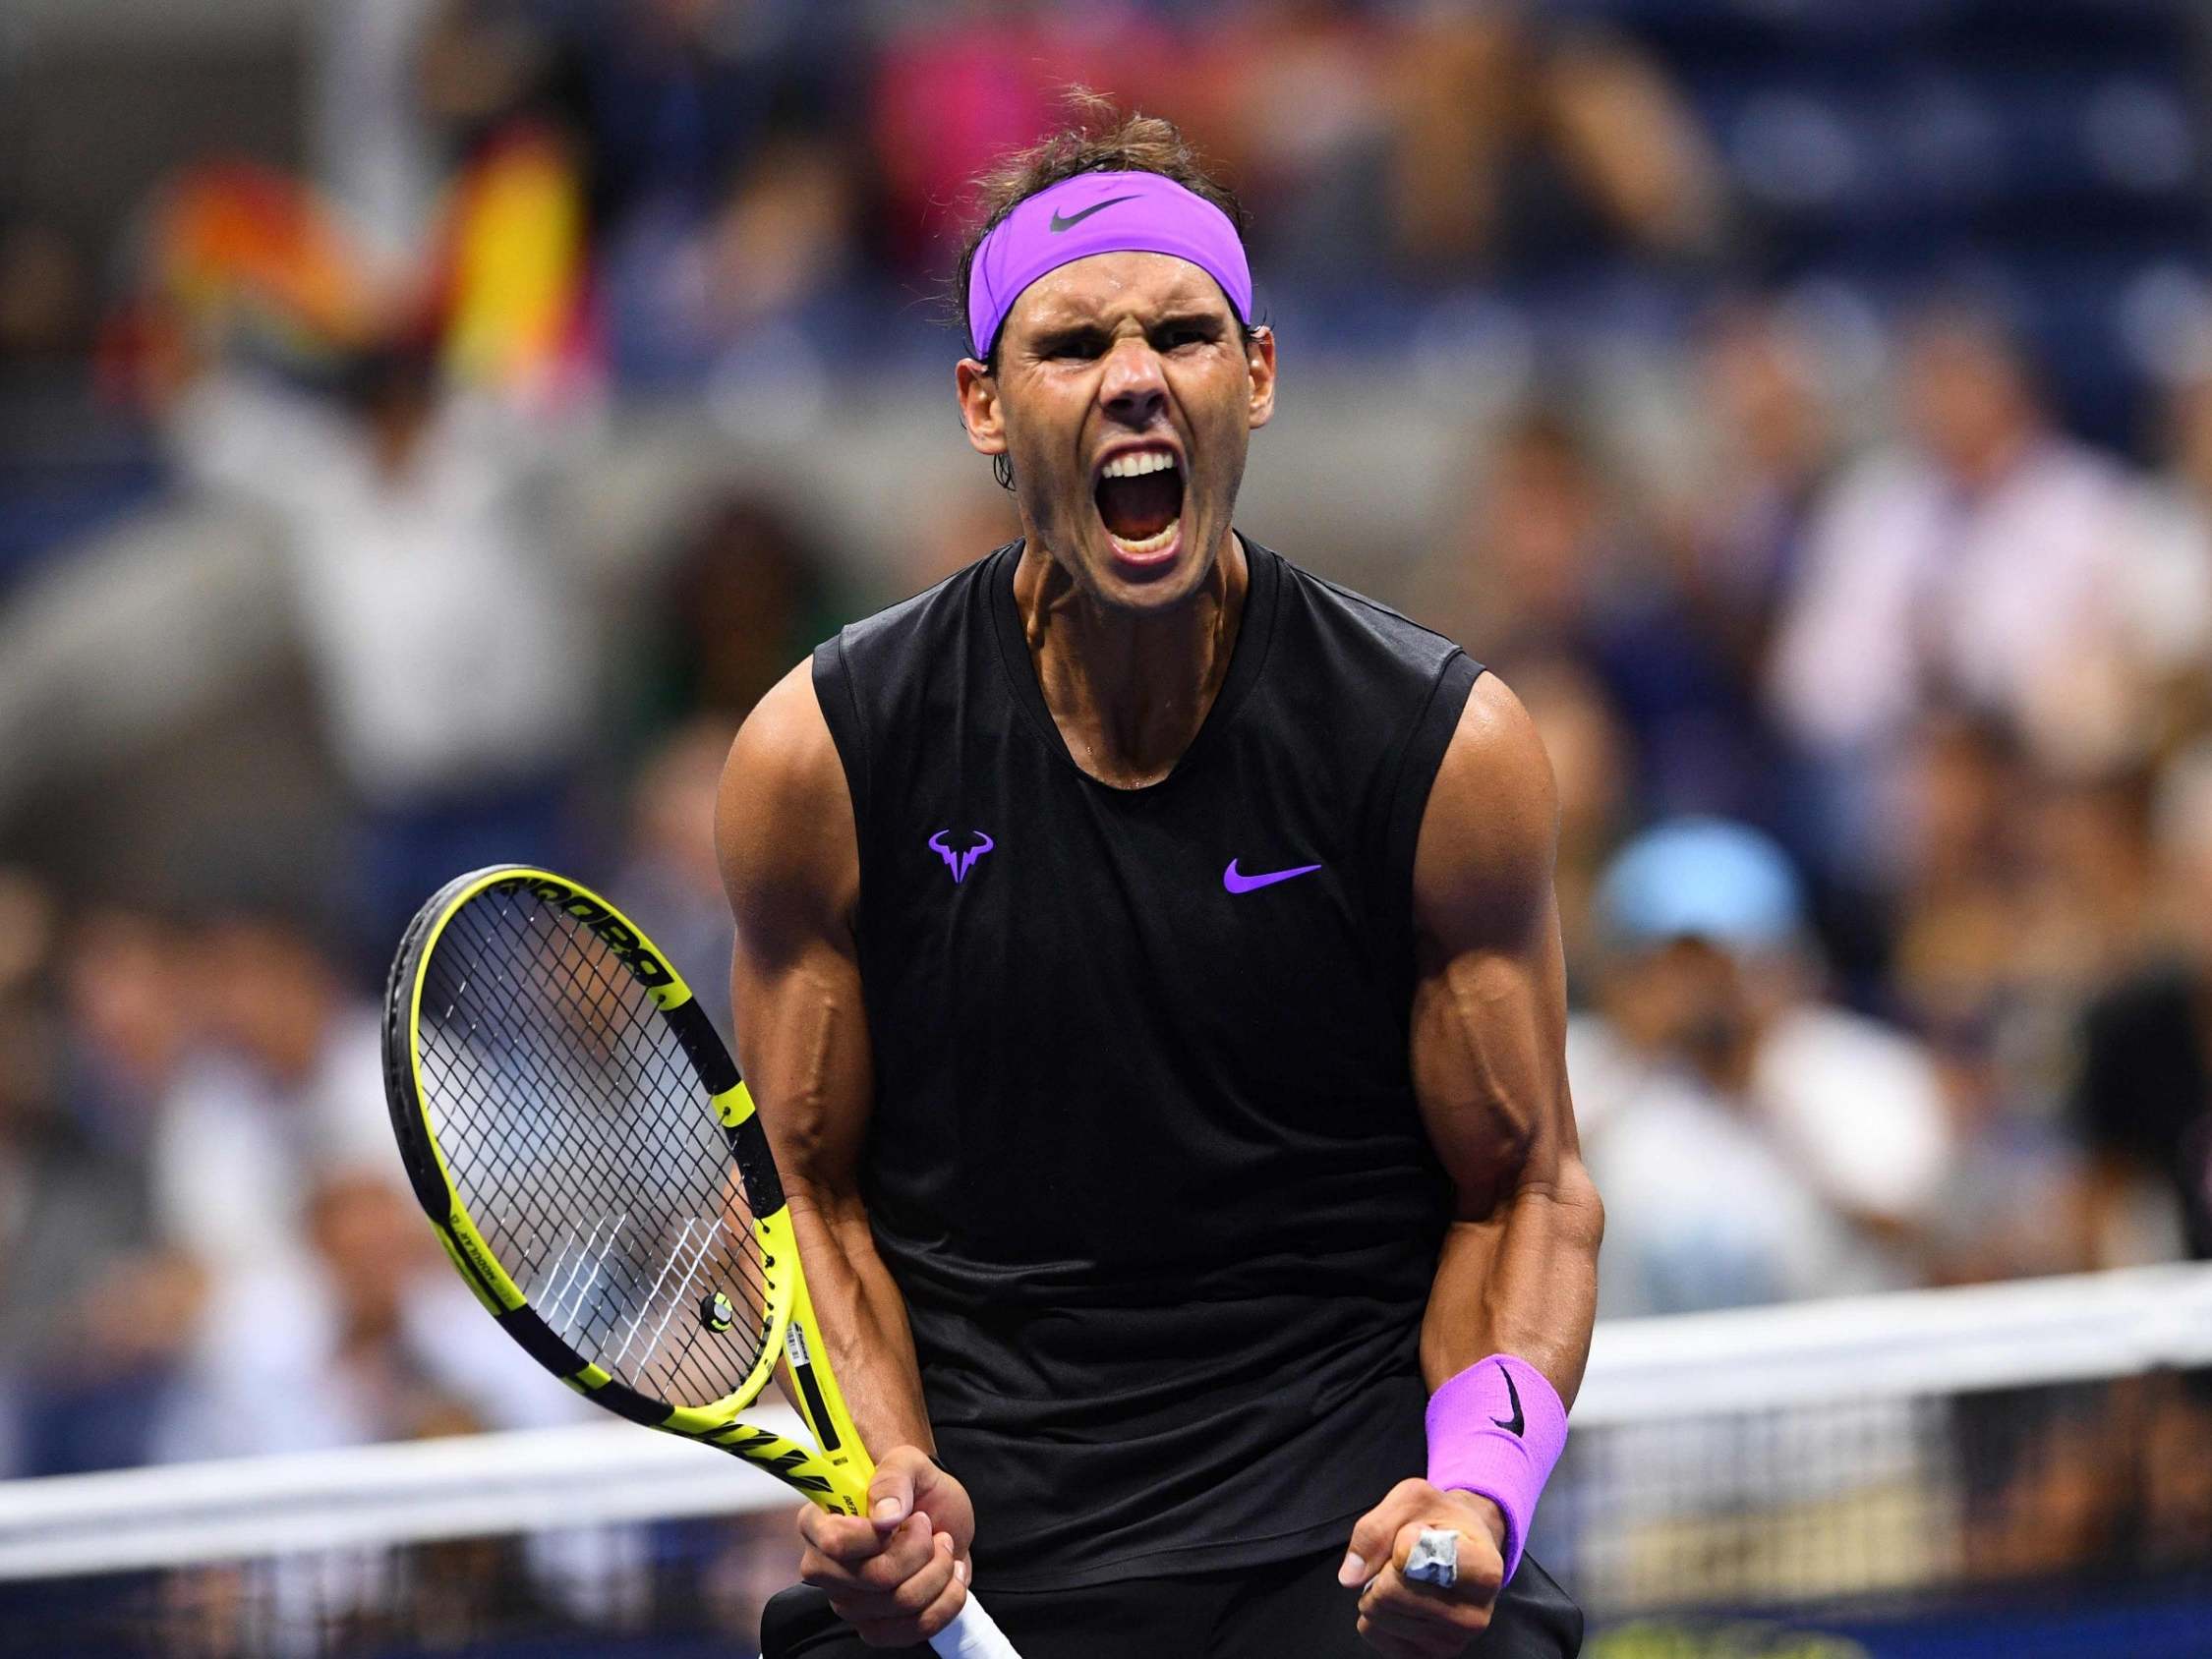 US Open 2019 Rafael Nadal through to semi-finals after straight-sets victory over Diego Schwartzman The Independent The Independent